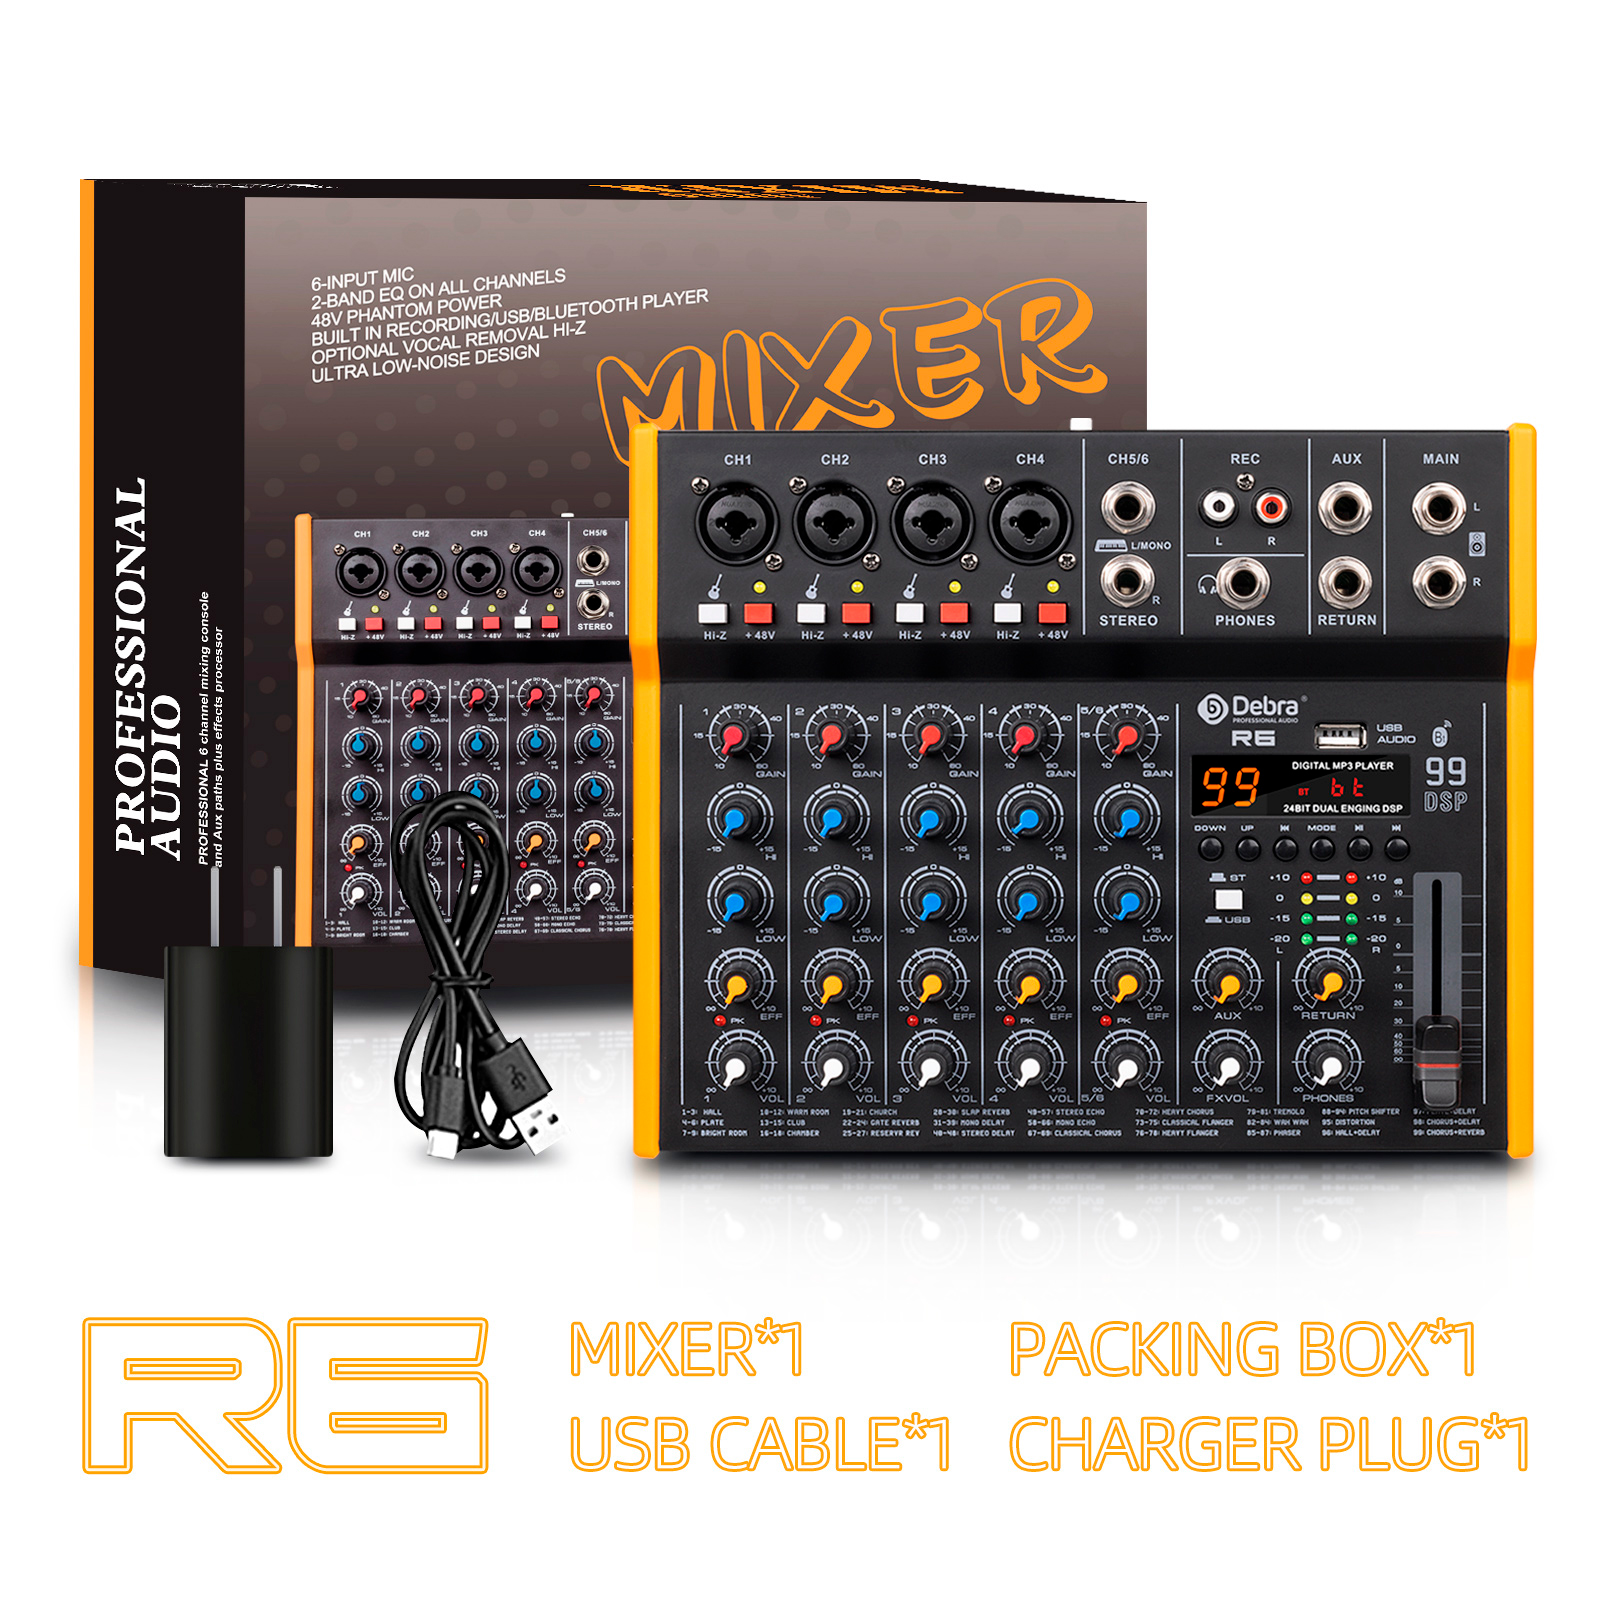 R4/R6 4/6 channel audio mixer with 99DSP